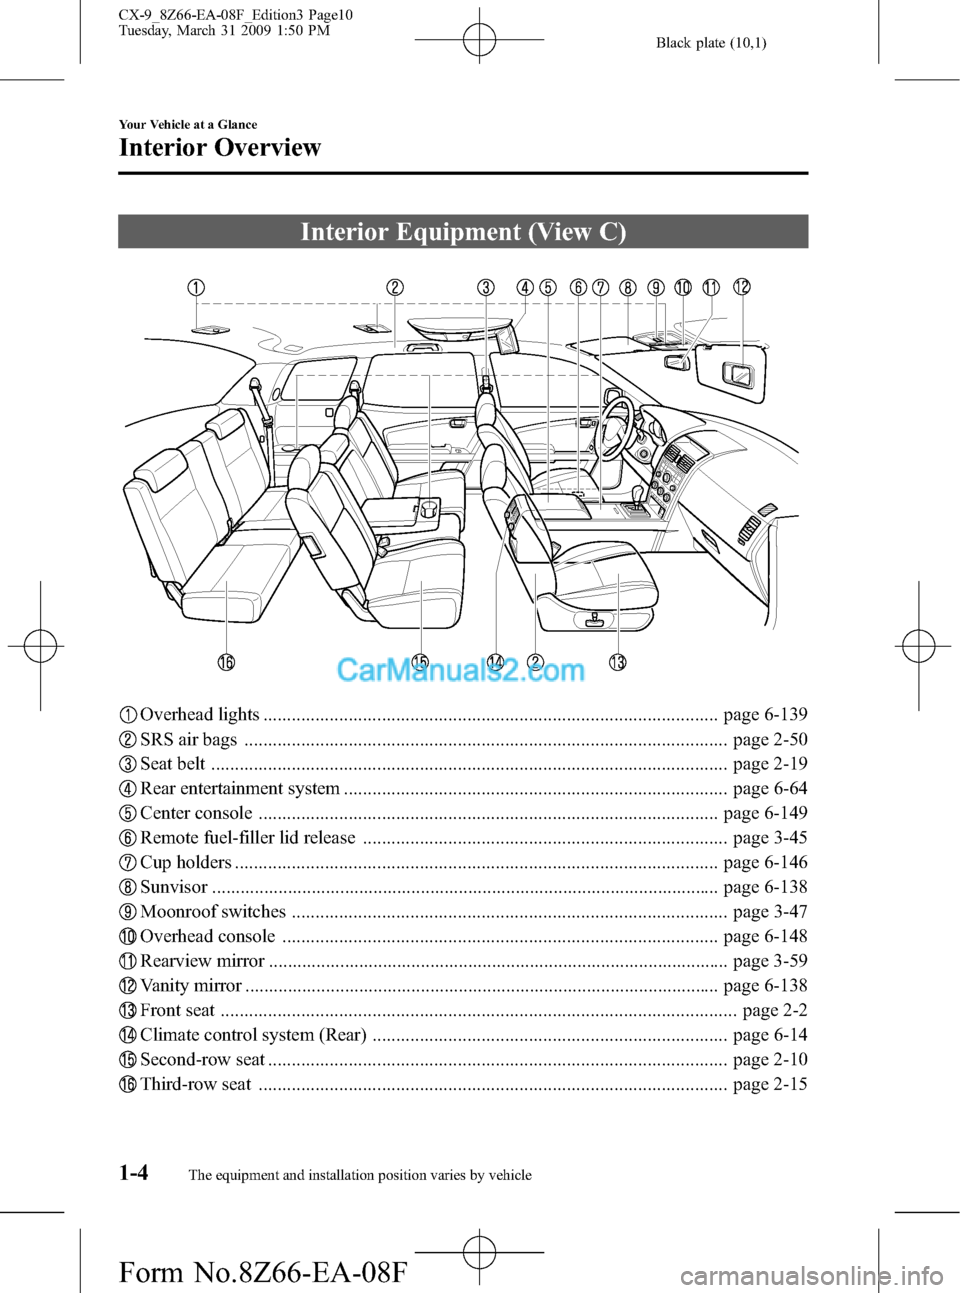 MAZDA MODEL CX-9 2009  Owners Manual (in English) Black plate (10,1)
Interior Equipment (View C)
Overhead lights ................................................................................................ page 6-139
SRS air bags ................